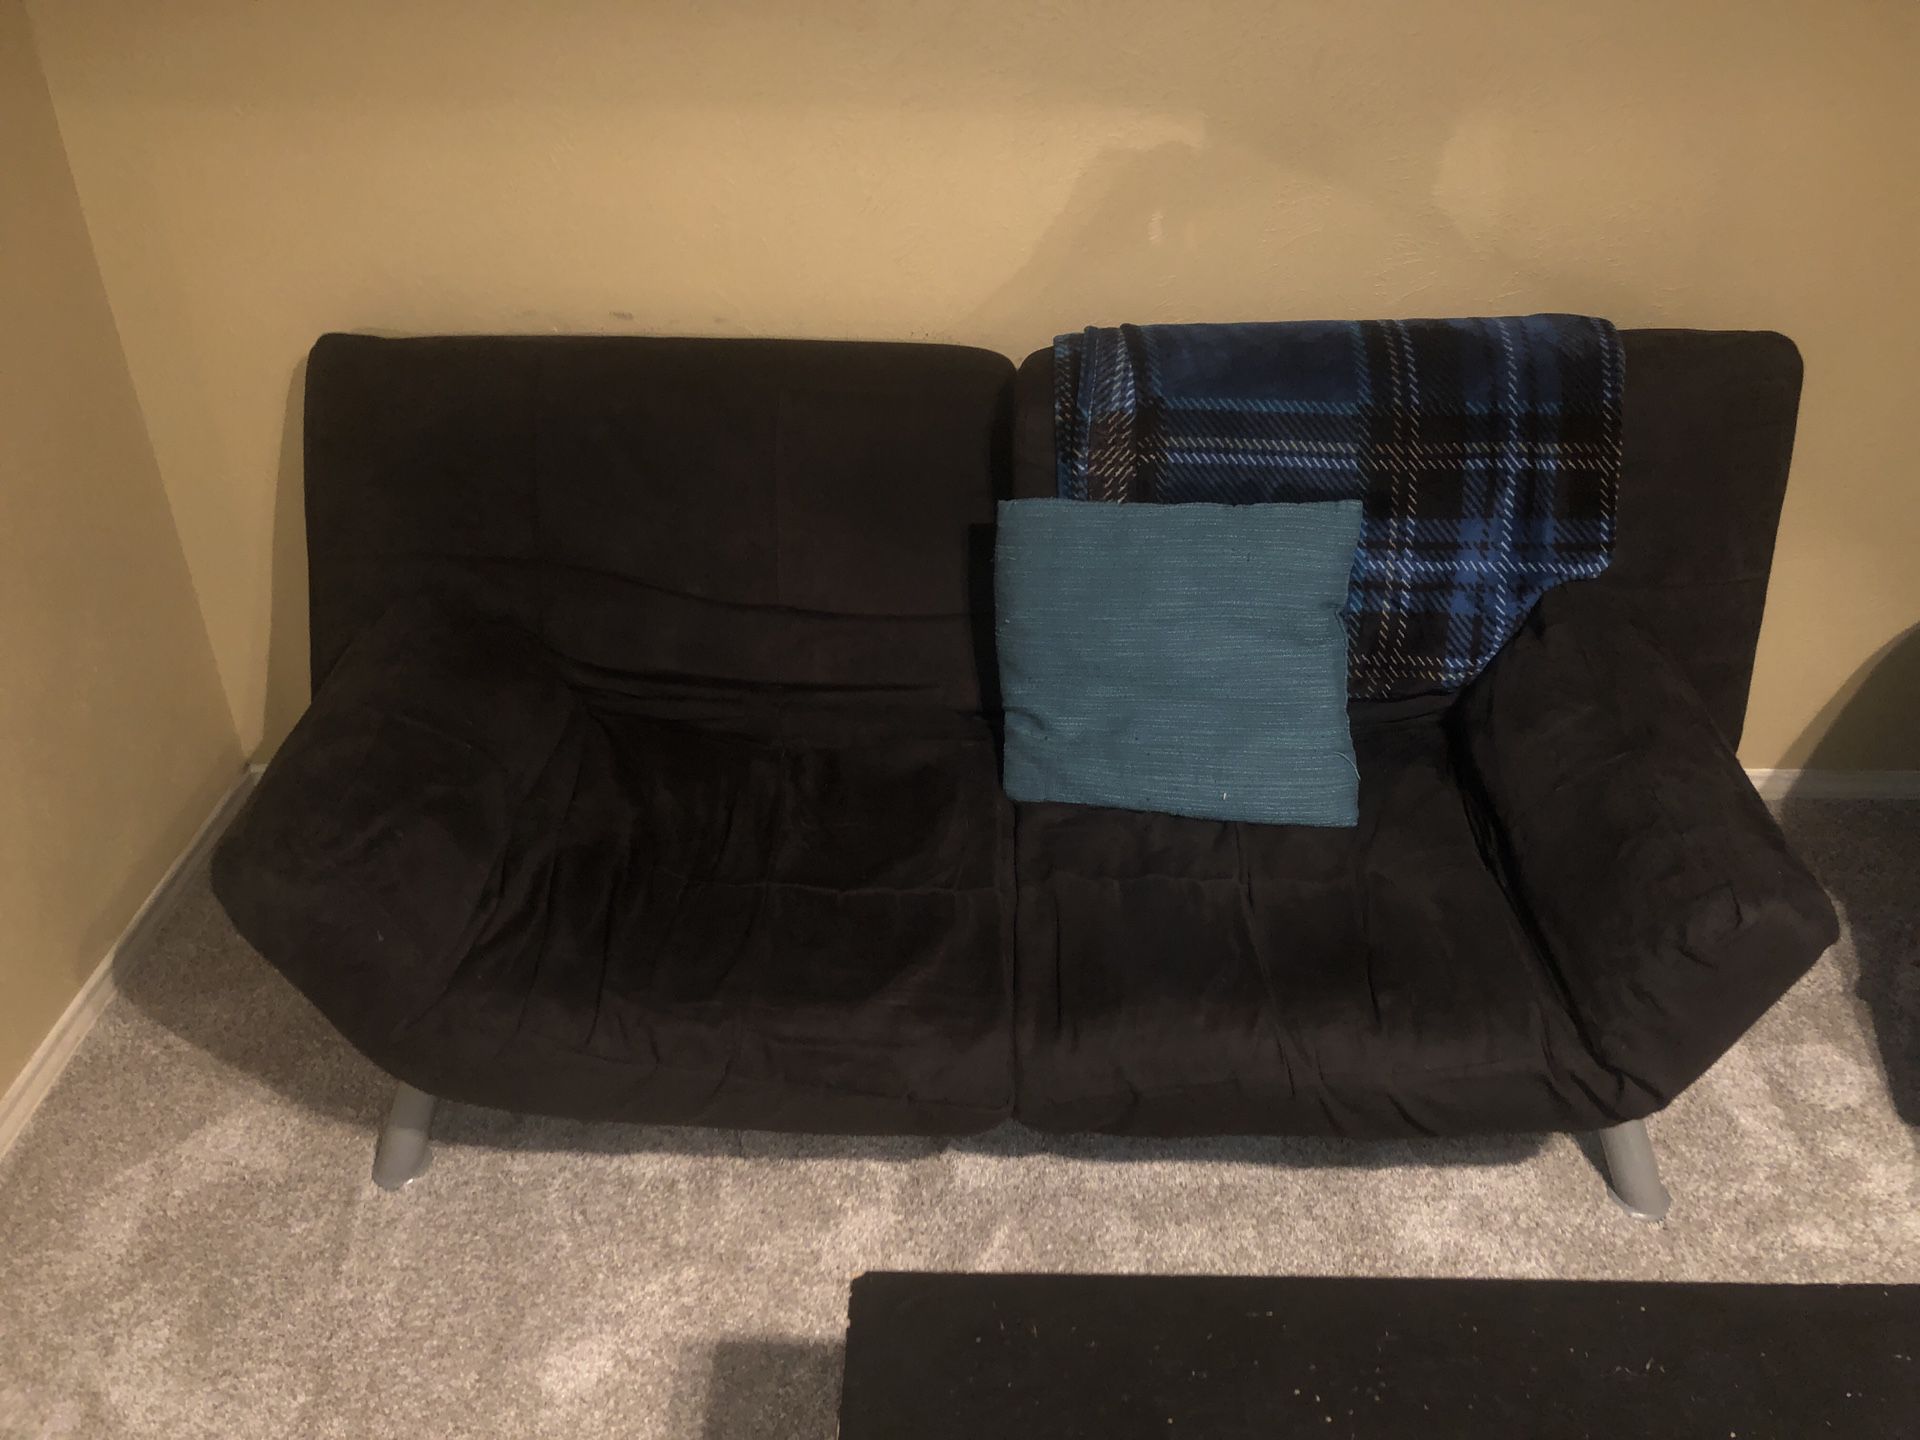 ($20 OBO) Futon that expands into a bed (approx L6ft X W4ft when expanded into a bed)